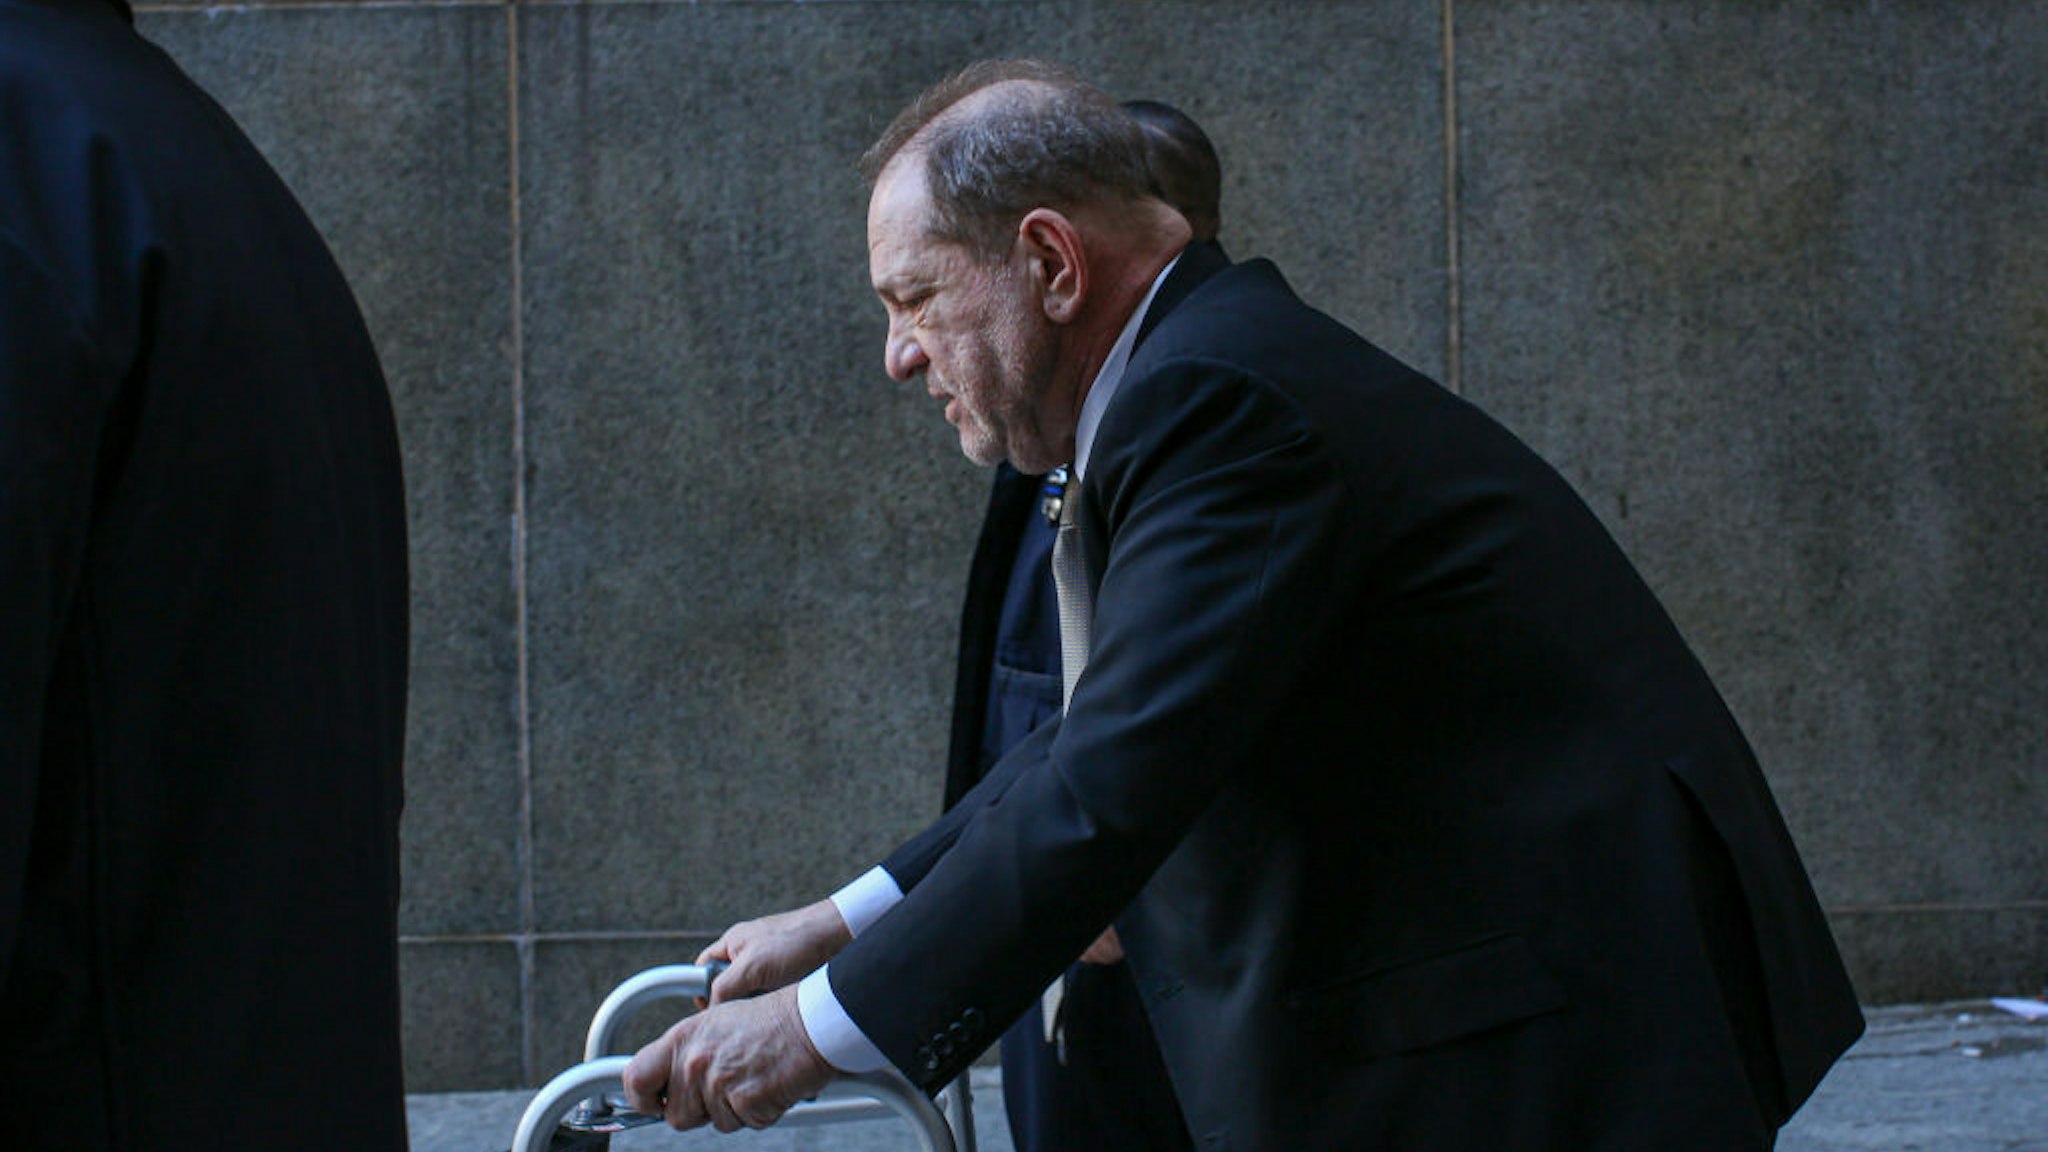 NEW YORK, NY - JANUARY 08: Harvey Weinstein leaves Manhattan court on January 8, 2020 in New York City. Weinstein, a movie producer whose alleged sexual misconduct helped spark the #MeToo movement, pleaded not-guilty on five counts of rape and sexual assault against two unnamed women and faces a possible life sentence in prison.